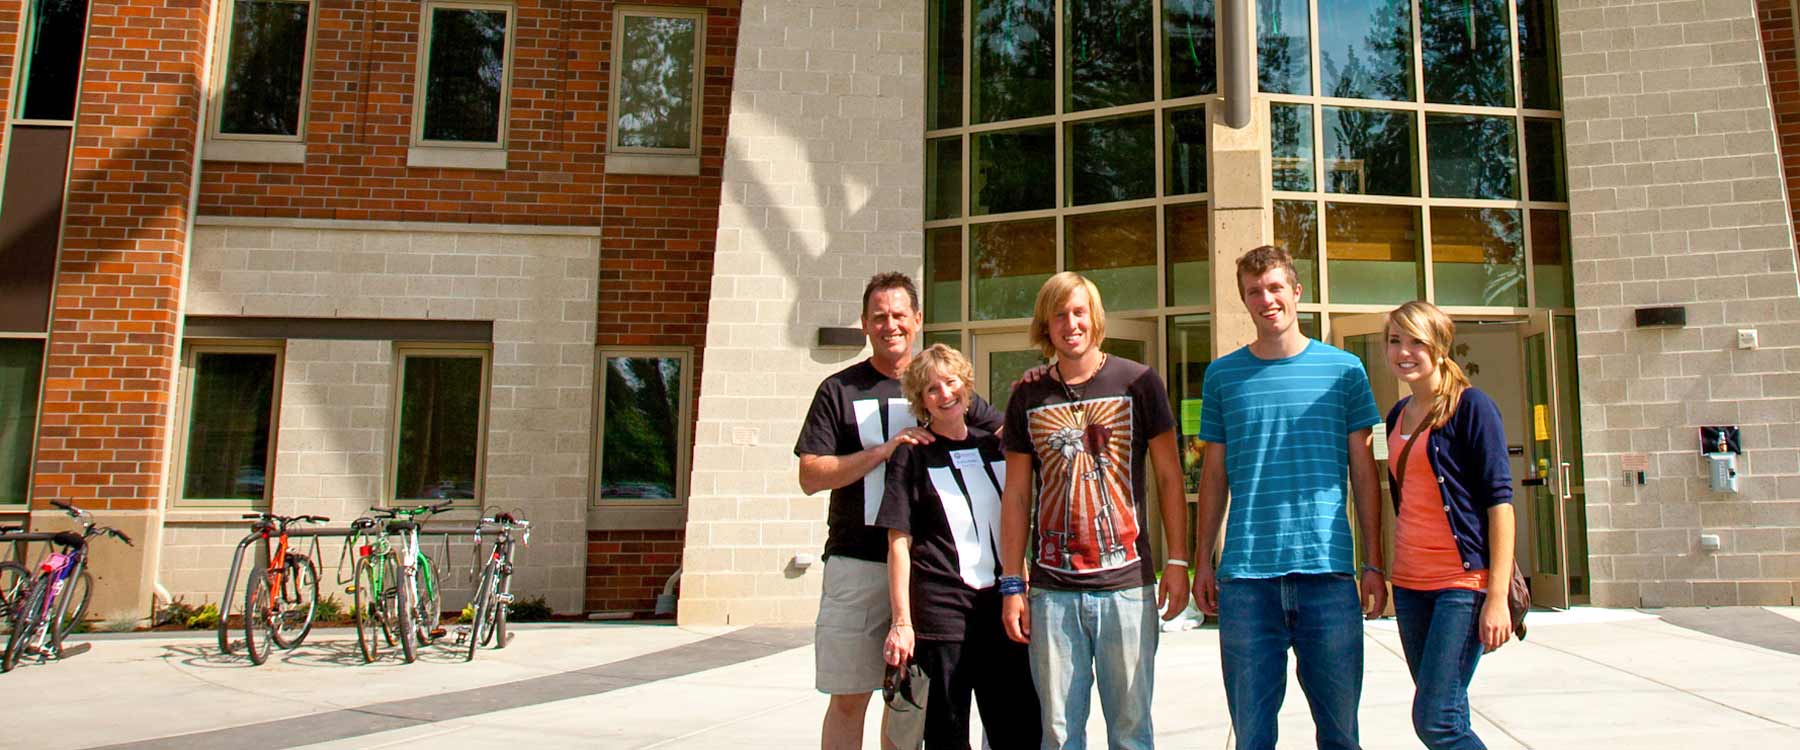 Two parents and three grown kids pose, smiling, outside a campus residence hall.